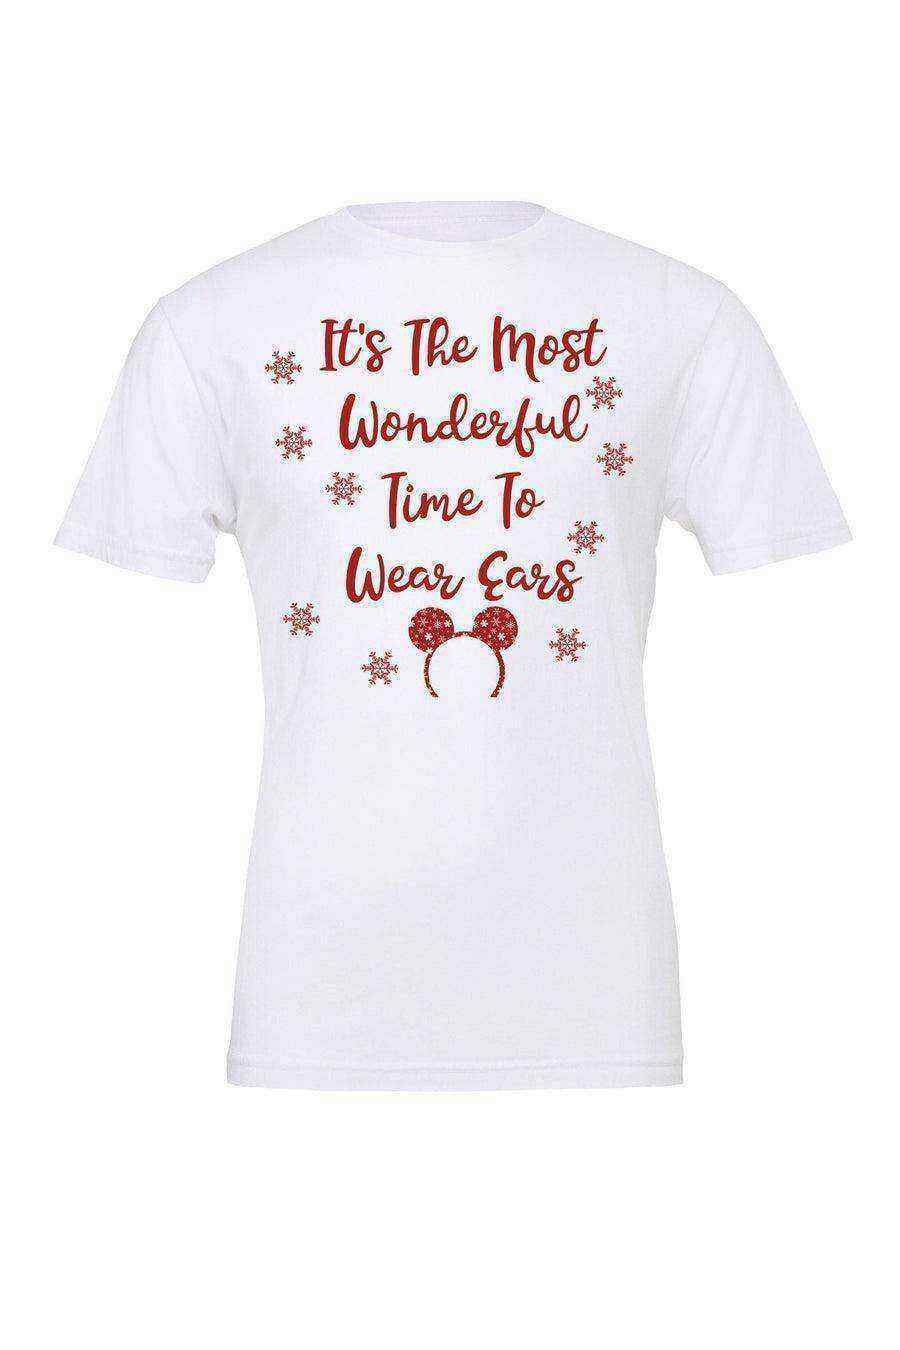 Its The Most Wonderful Time To Wear Ears - Dylan's Tees